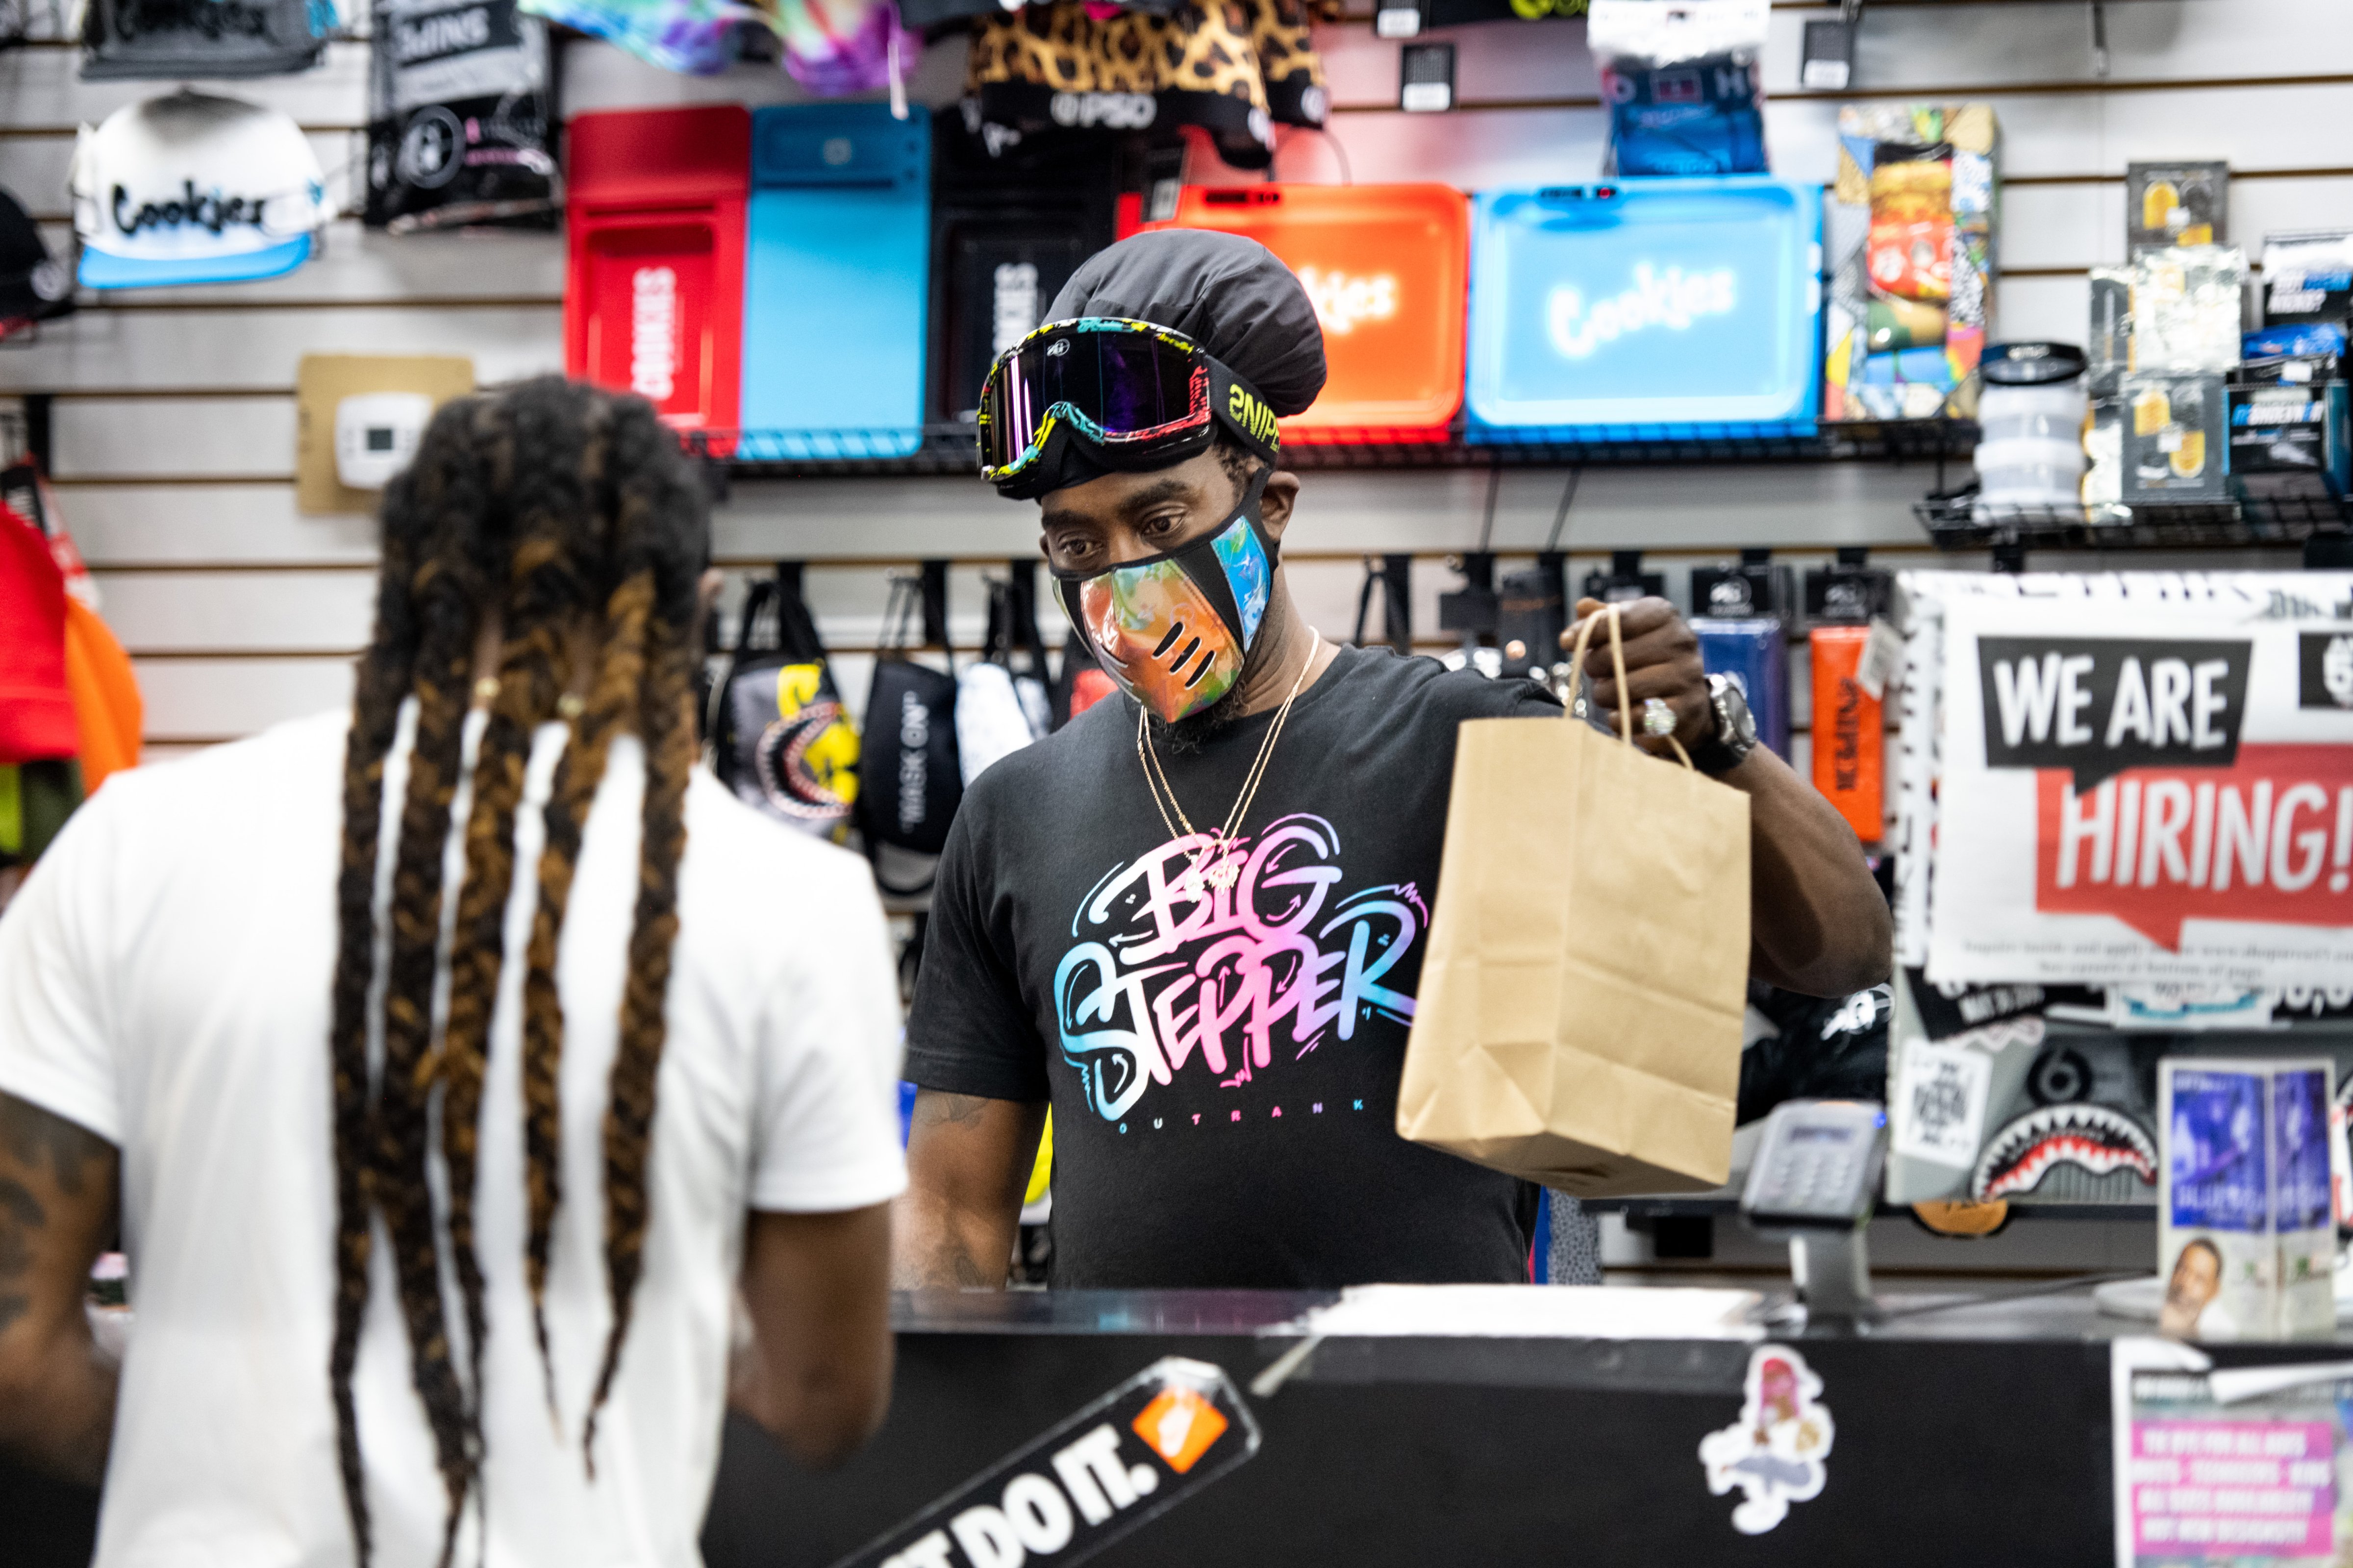 Small business owner Birl Hicks helps a customer at Columbia Place Mall in Columbia, South Carolina on April 24, 2020. (Sean Rayford—Getty Images)